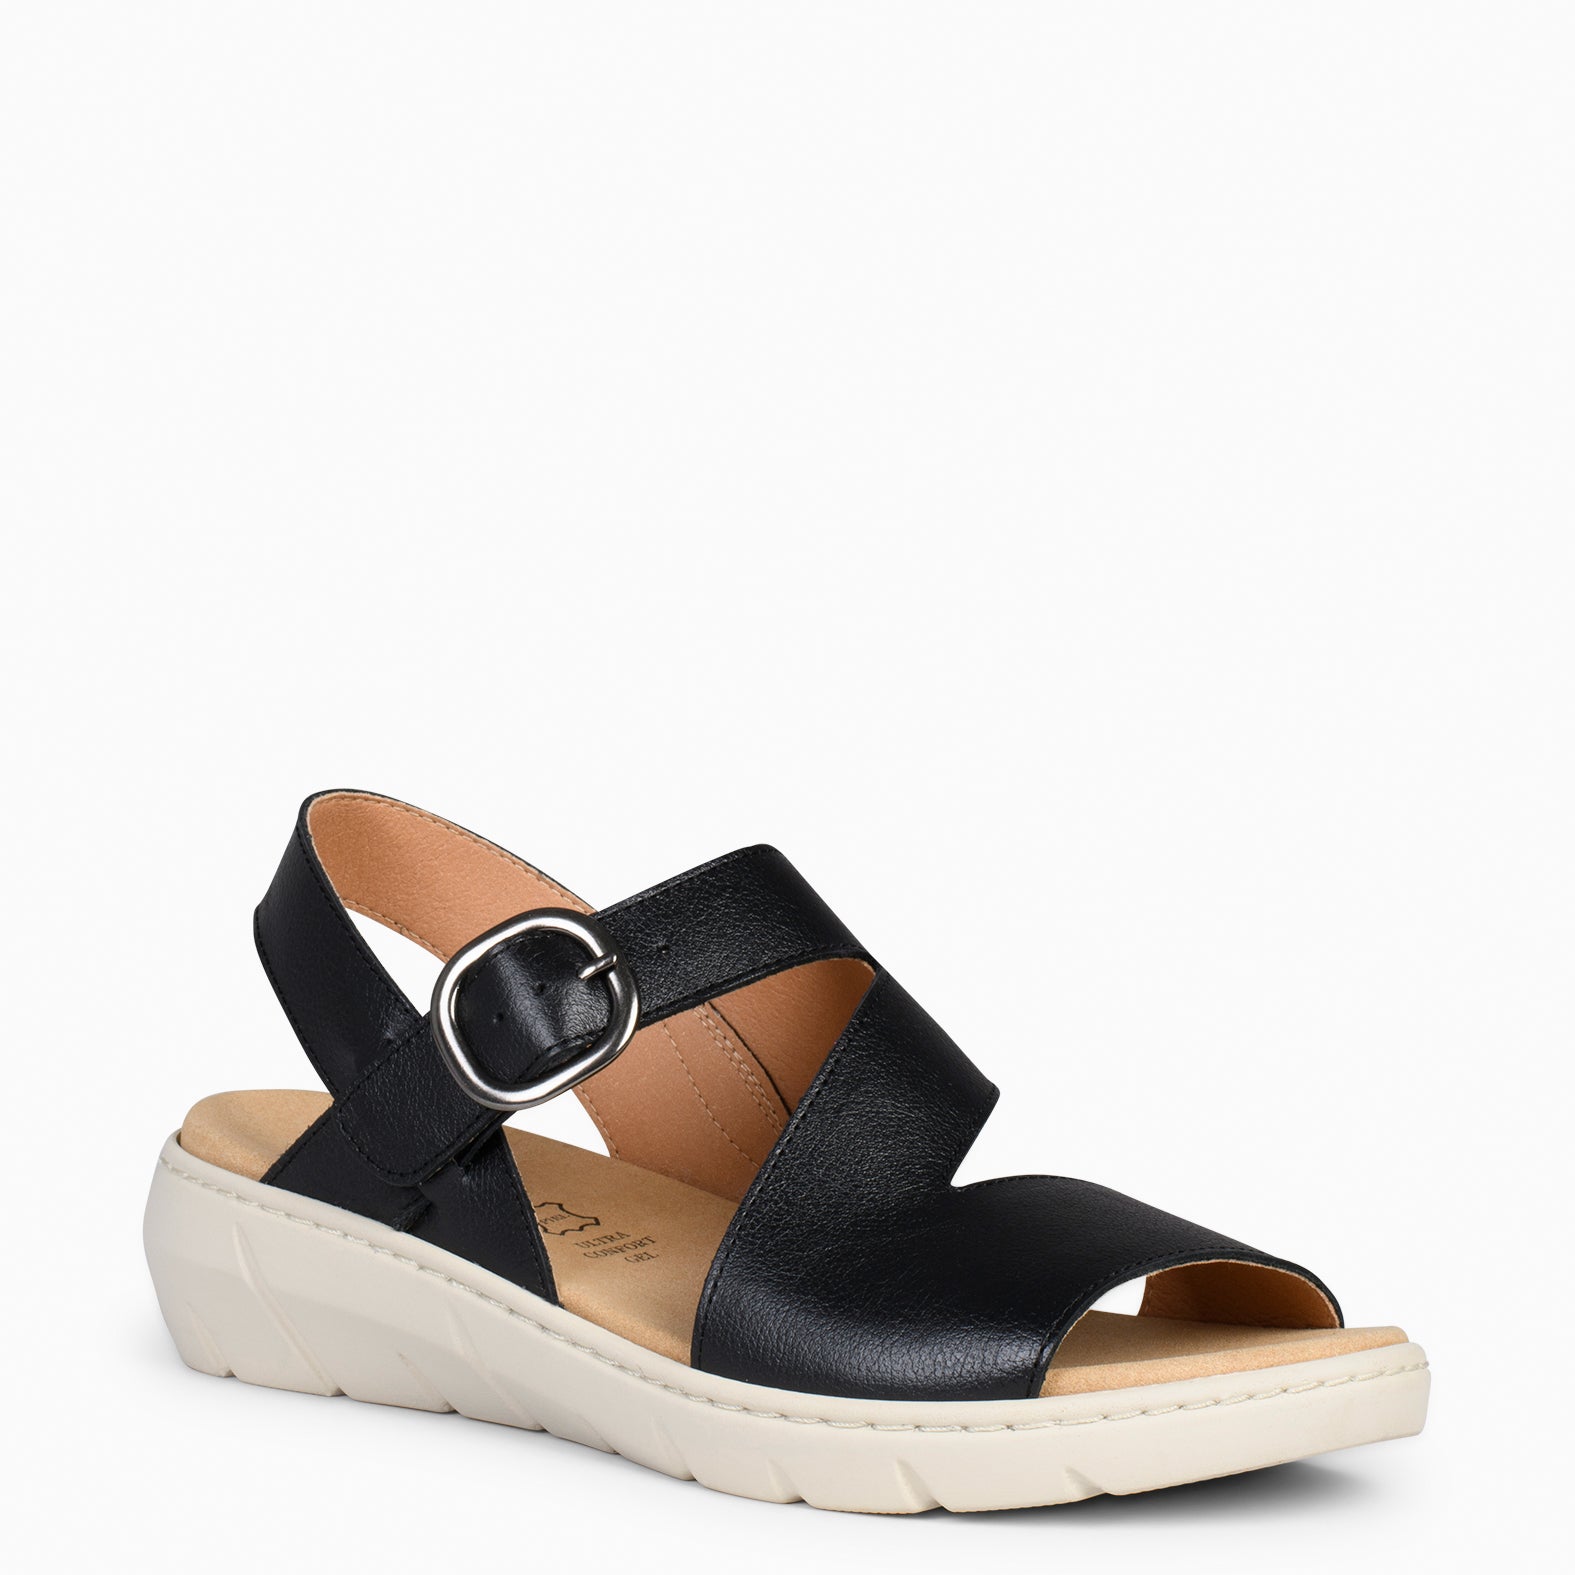 NATURA – BLACK sandals with removable insole